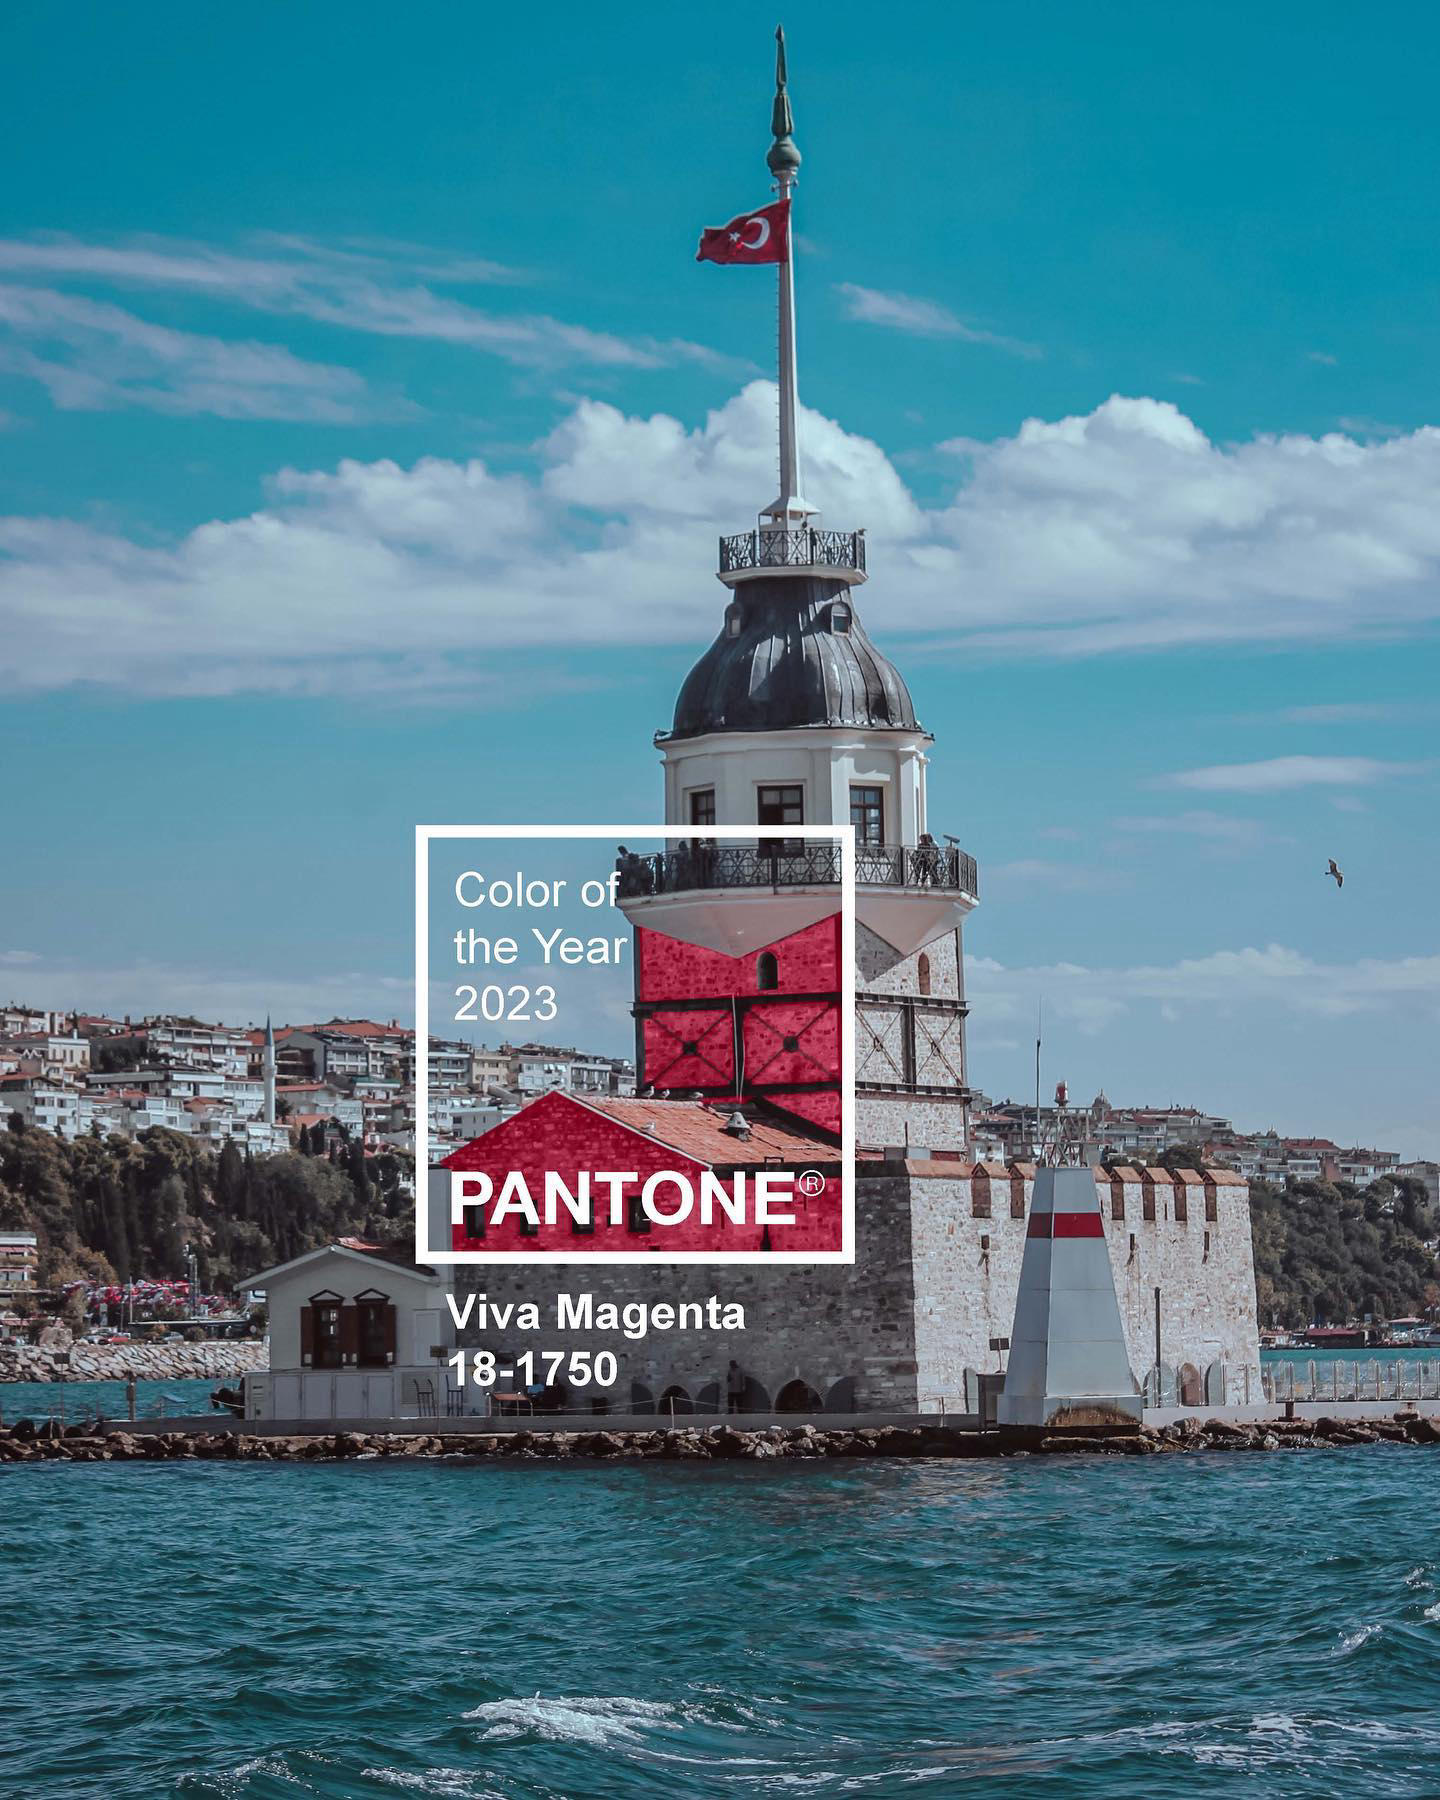 #istanbul - Pantone’s 2023 color, as always, suits the best to us, to Istanbul